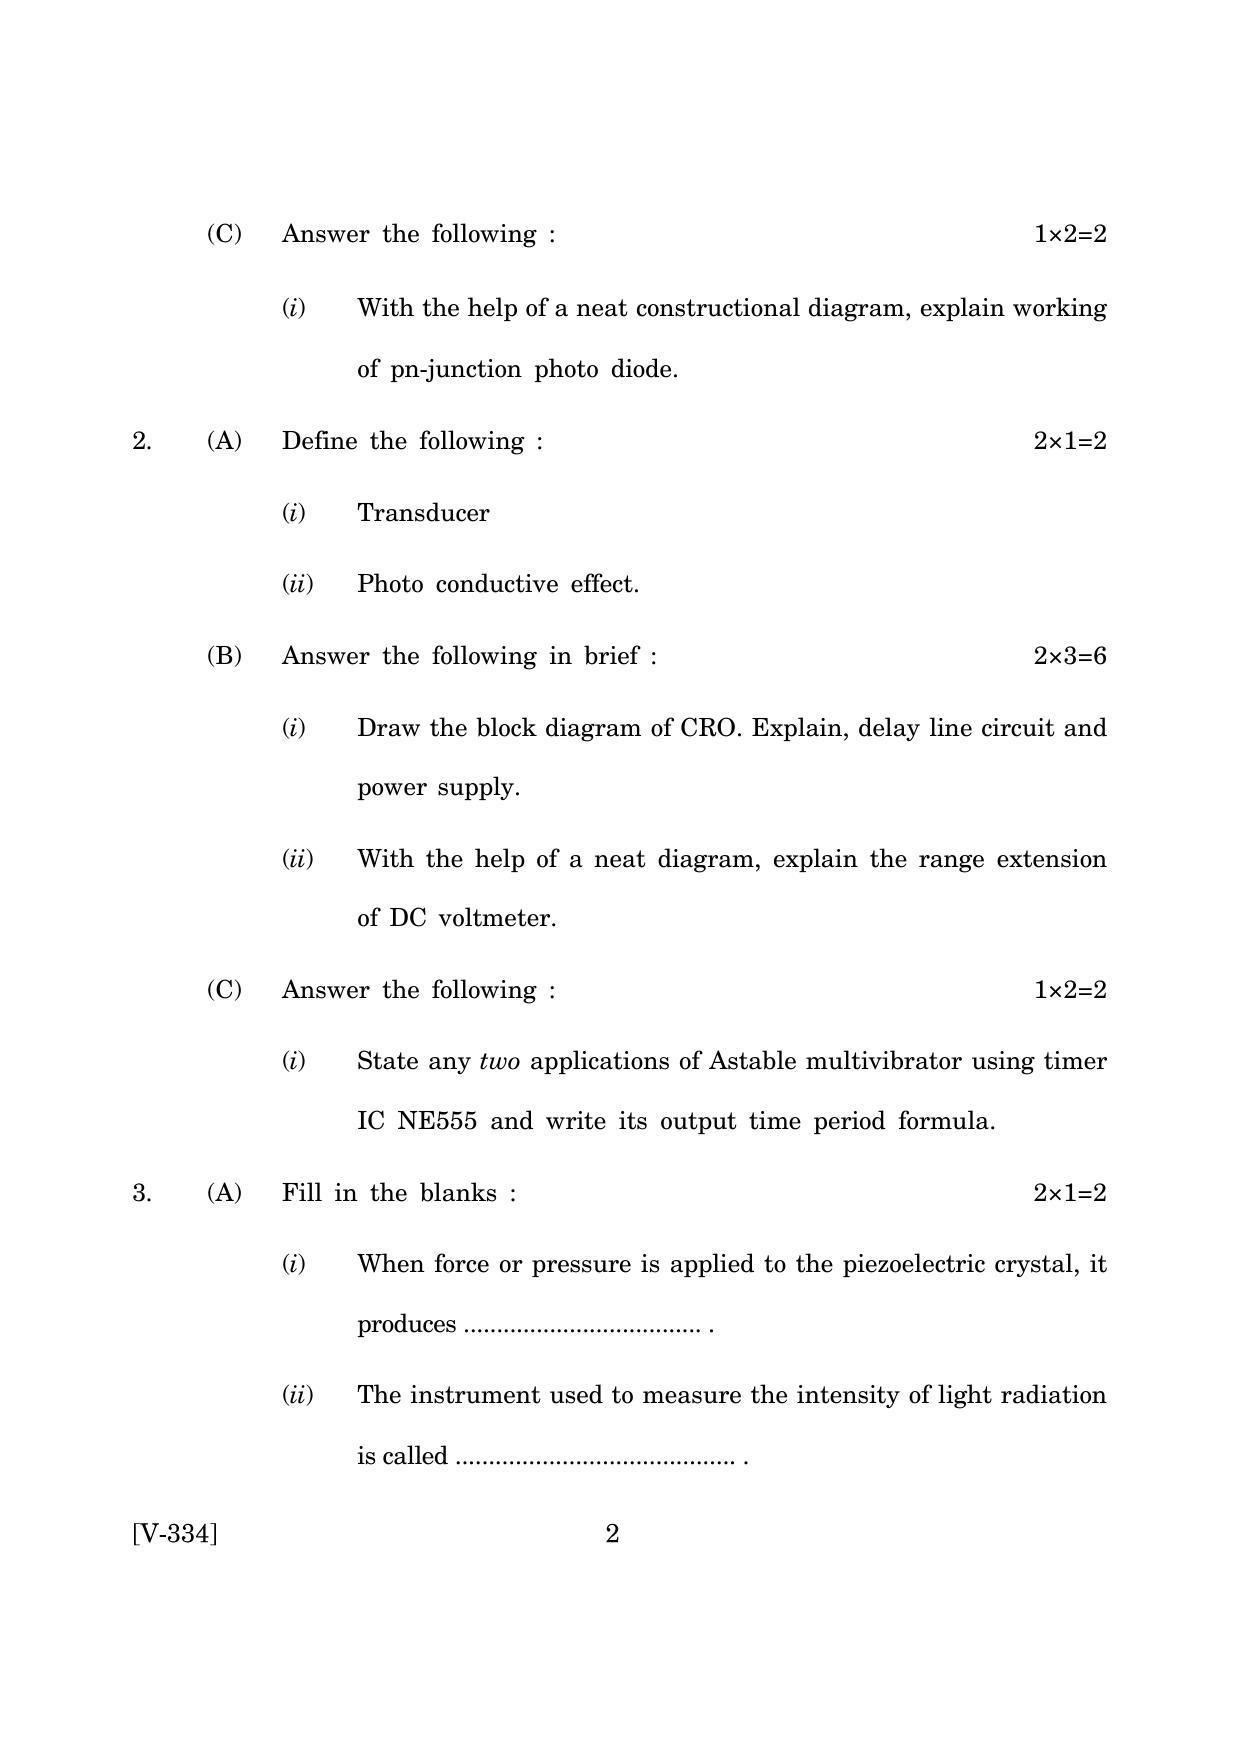 Goa Board Class 12 Industrial Electronics & Instrumentation  2019 (March 2019) Question Paper - Page 2